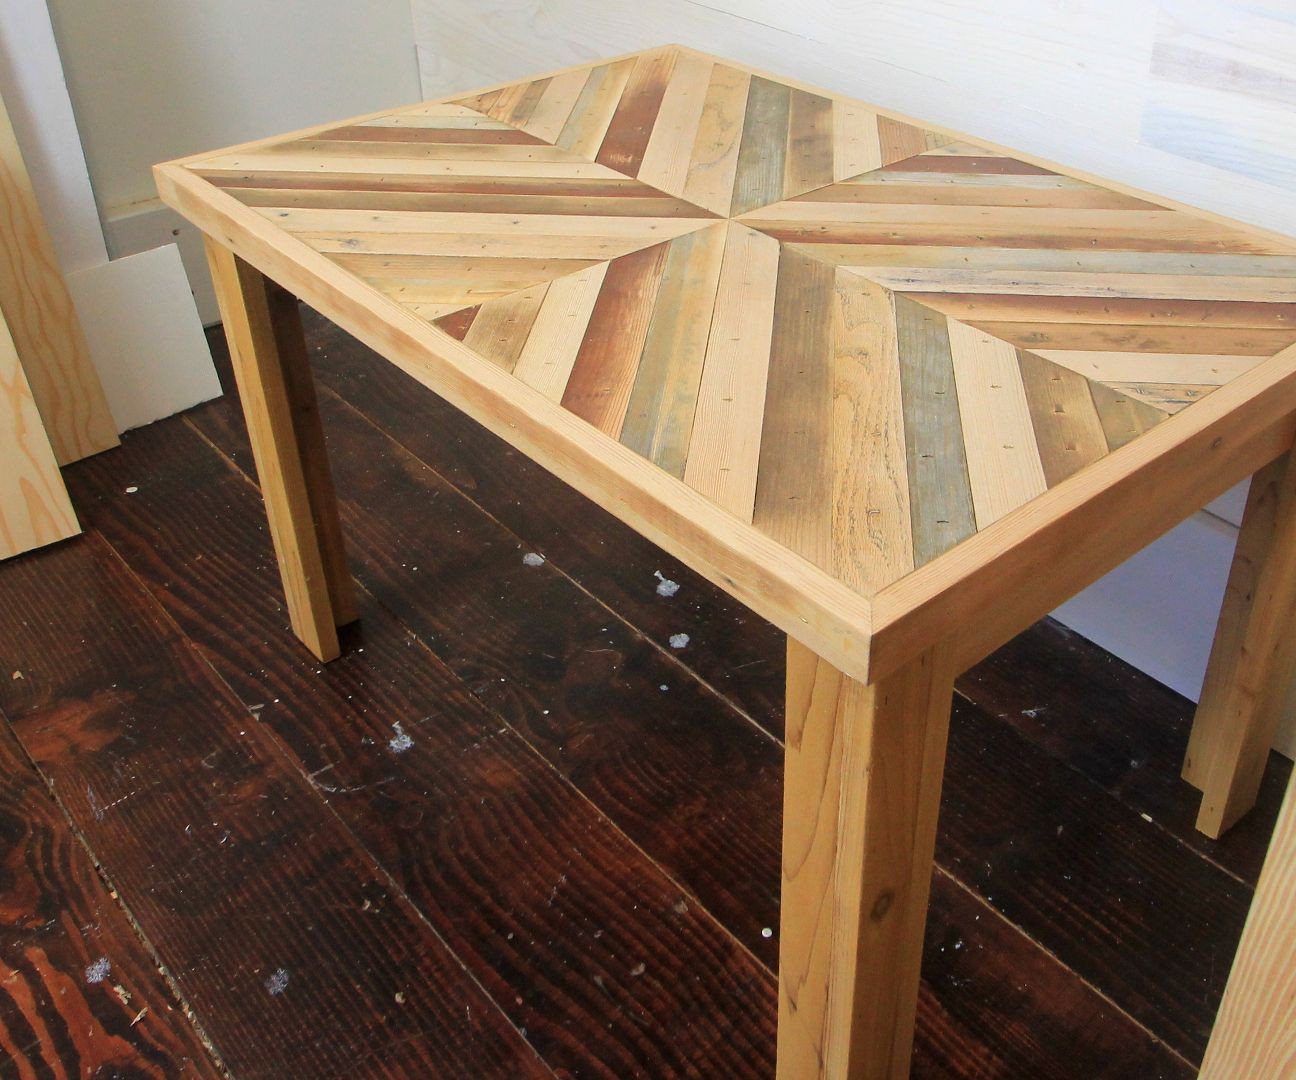 DIY Wood Tables
 DIY Rustic Style Coffee Table with Reclaimed Wood